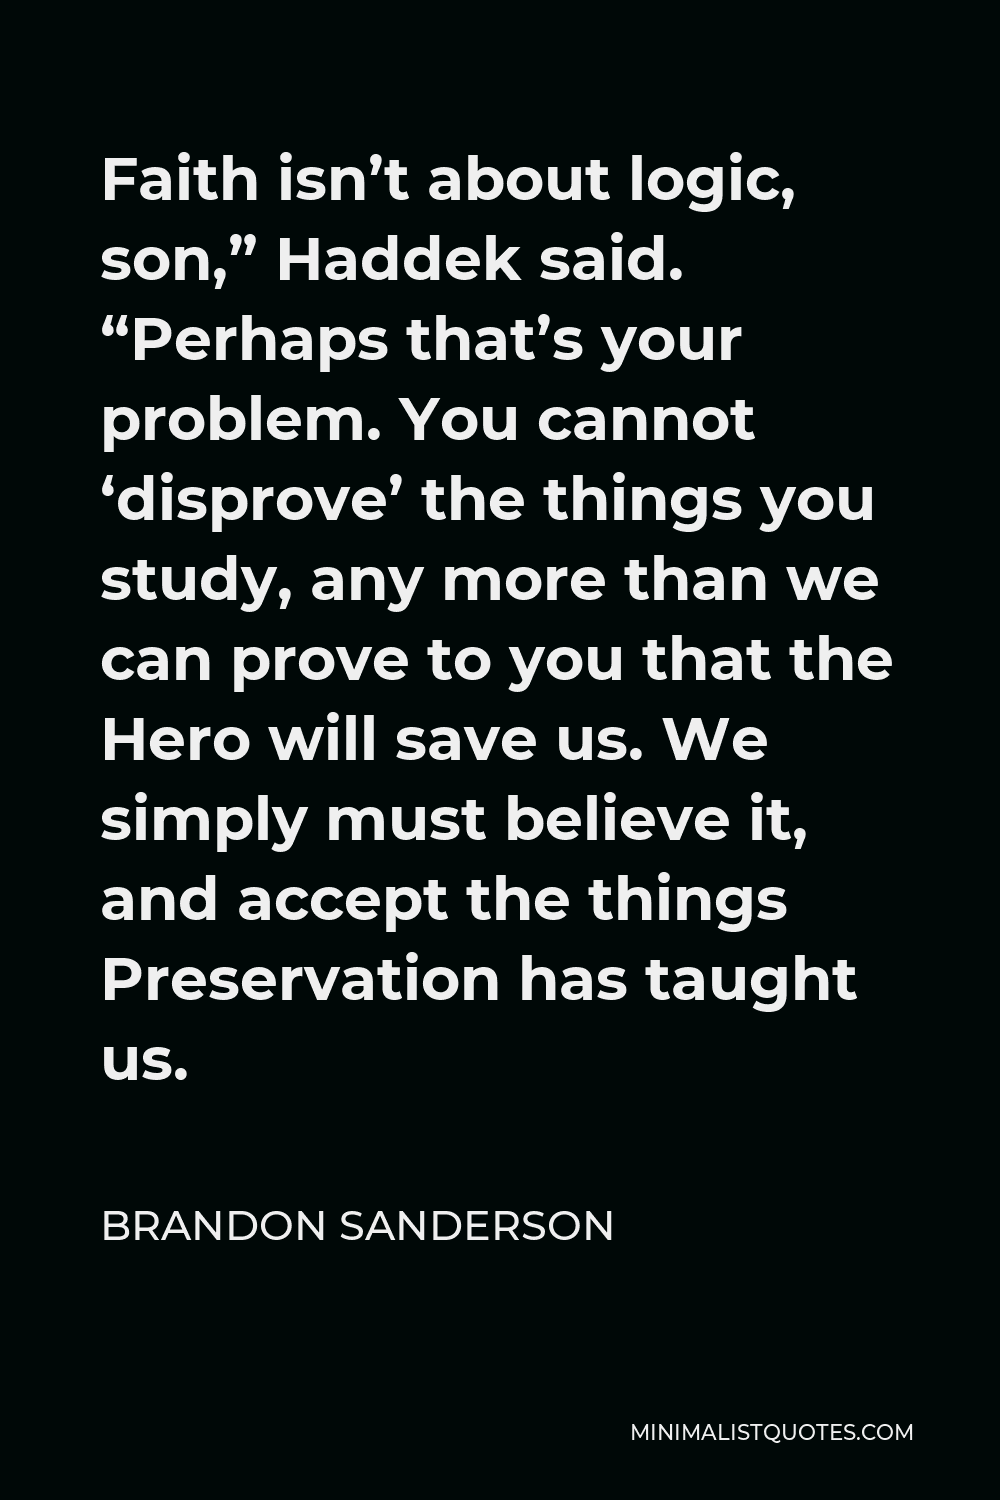 Brandon Sanderson Quote - Faith isn’t about logic, son,” Haddek said. “Perhaps that’s your problem. You cannot ‘disprove’ the things you study, any more than we can prove to you that the Hero will save us. We simply must believe it, and accept the things Preservation has taught us.